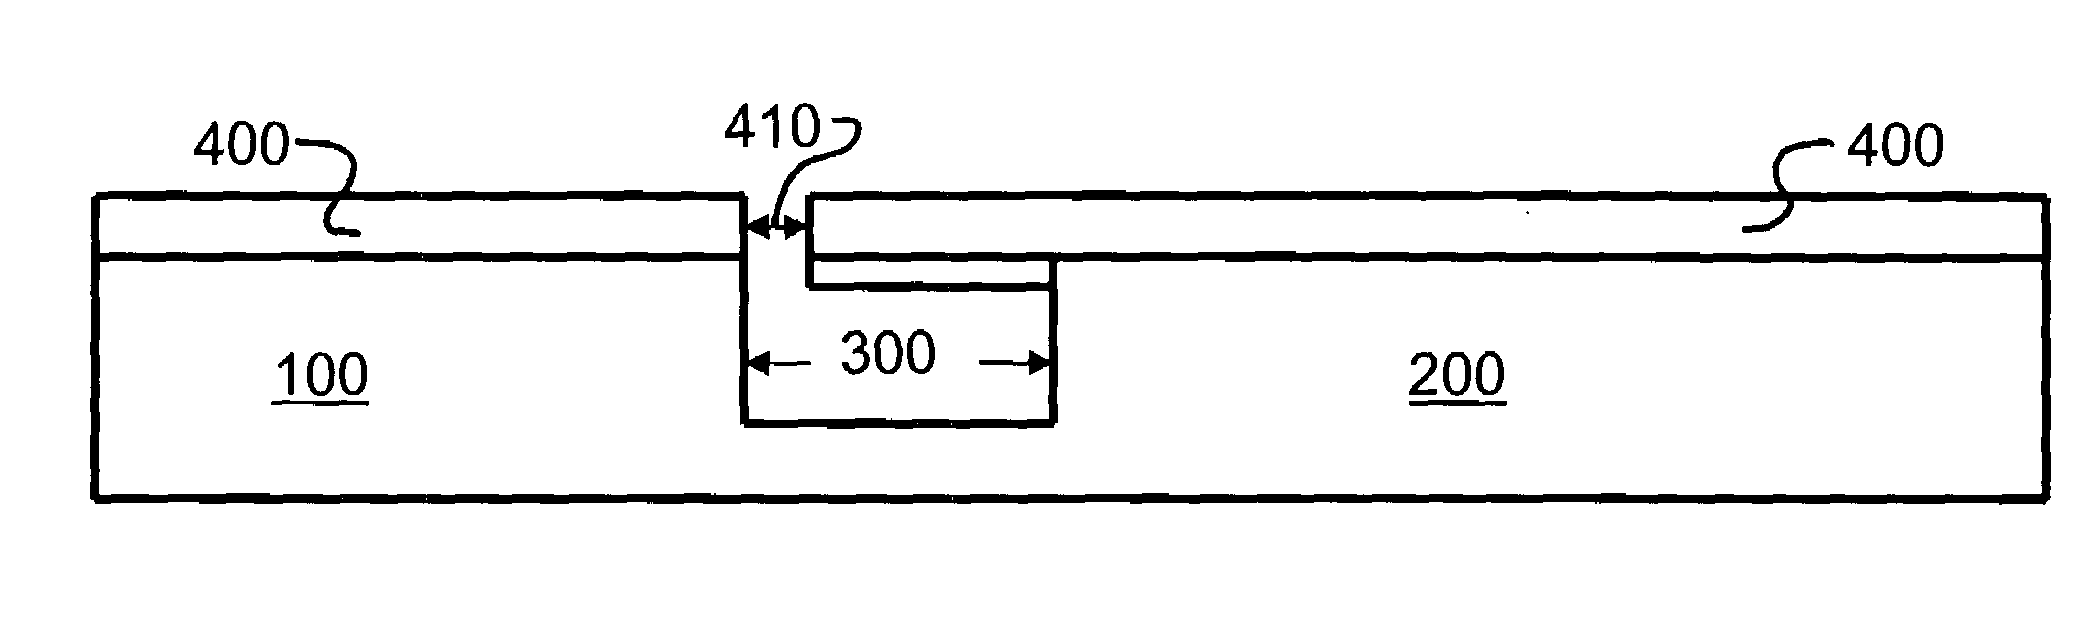 Molecular detection using an optical waveguide fixed to a cantilever